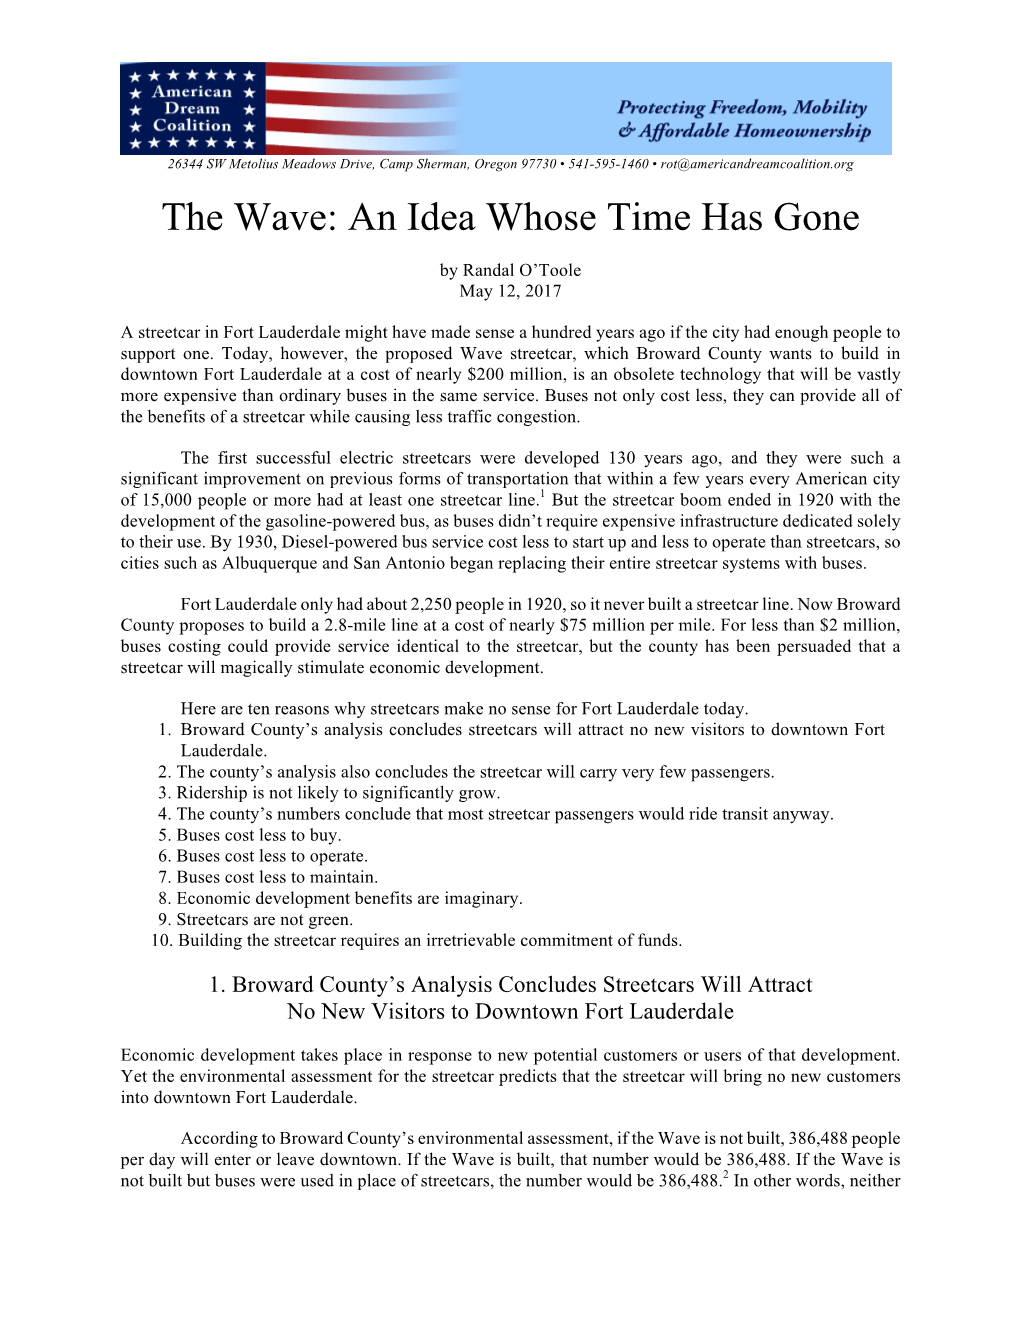 The Wave: an Idea Whose Time Has Gone